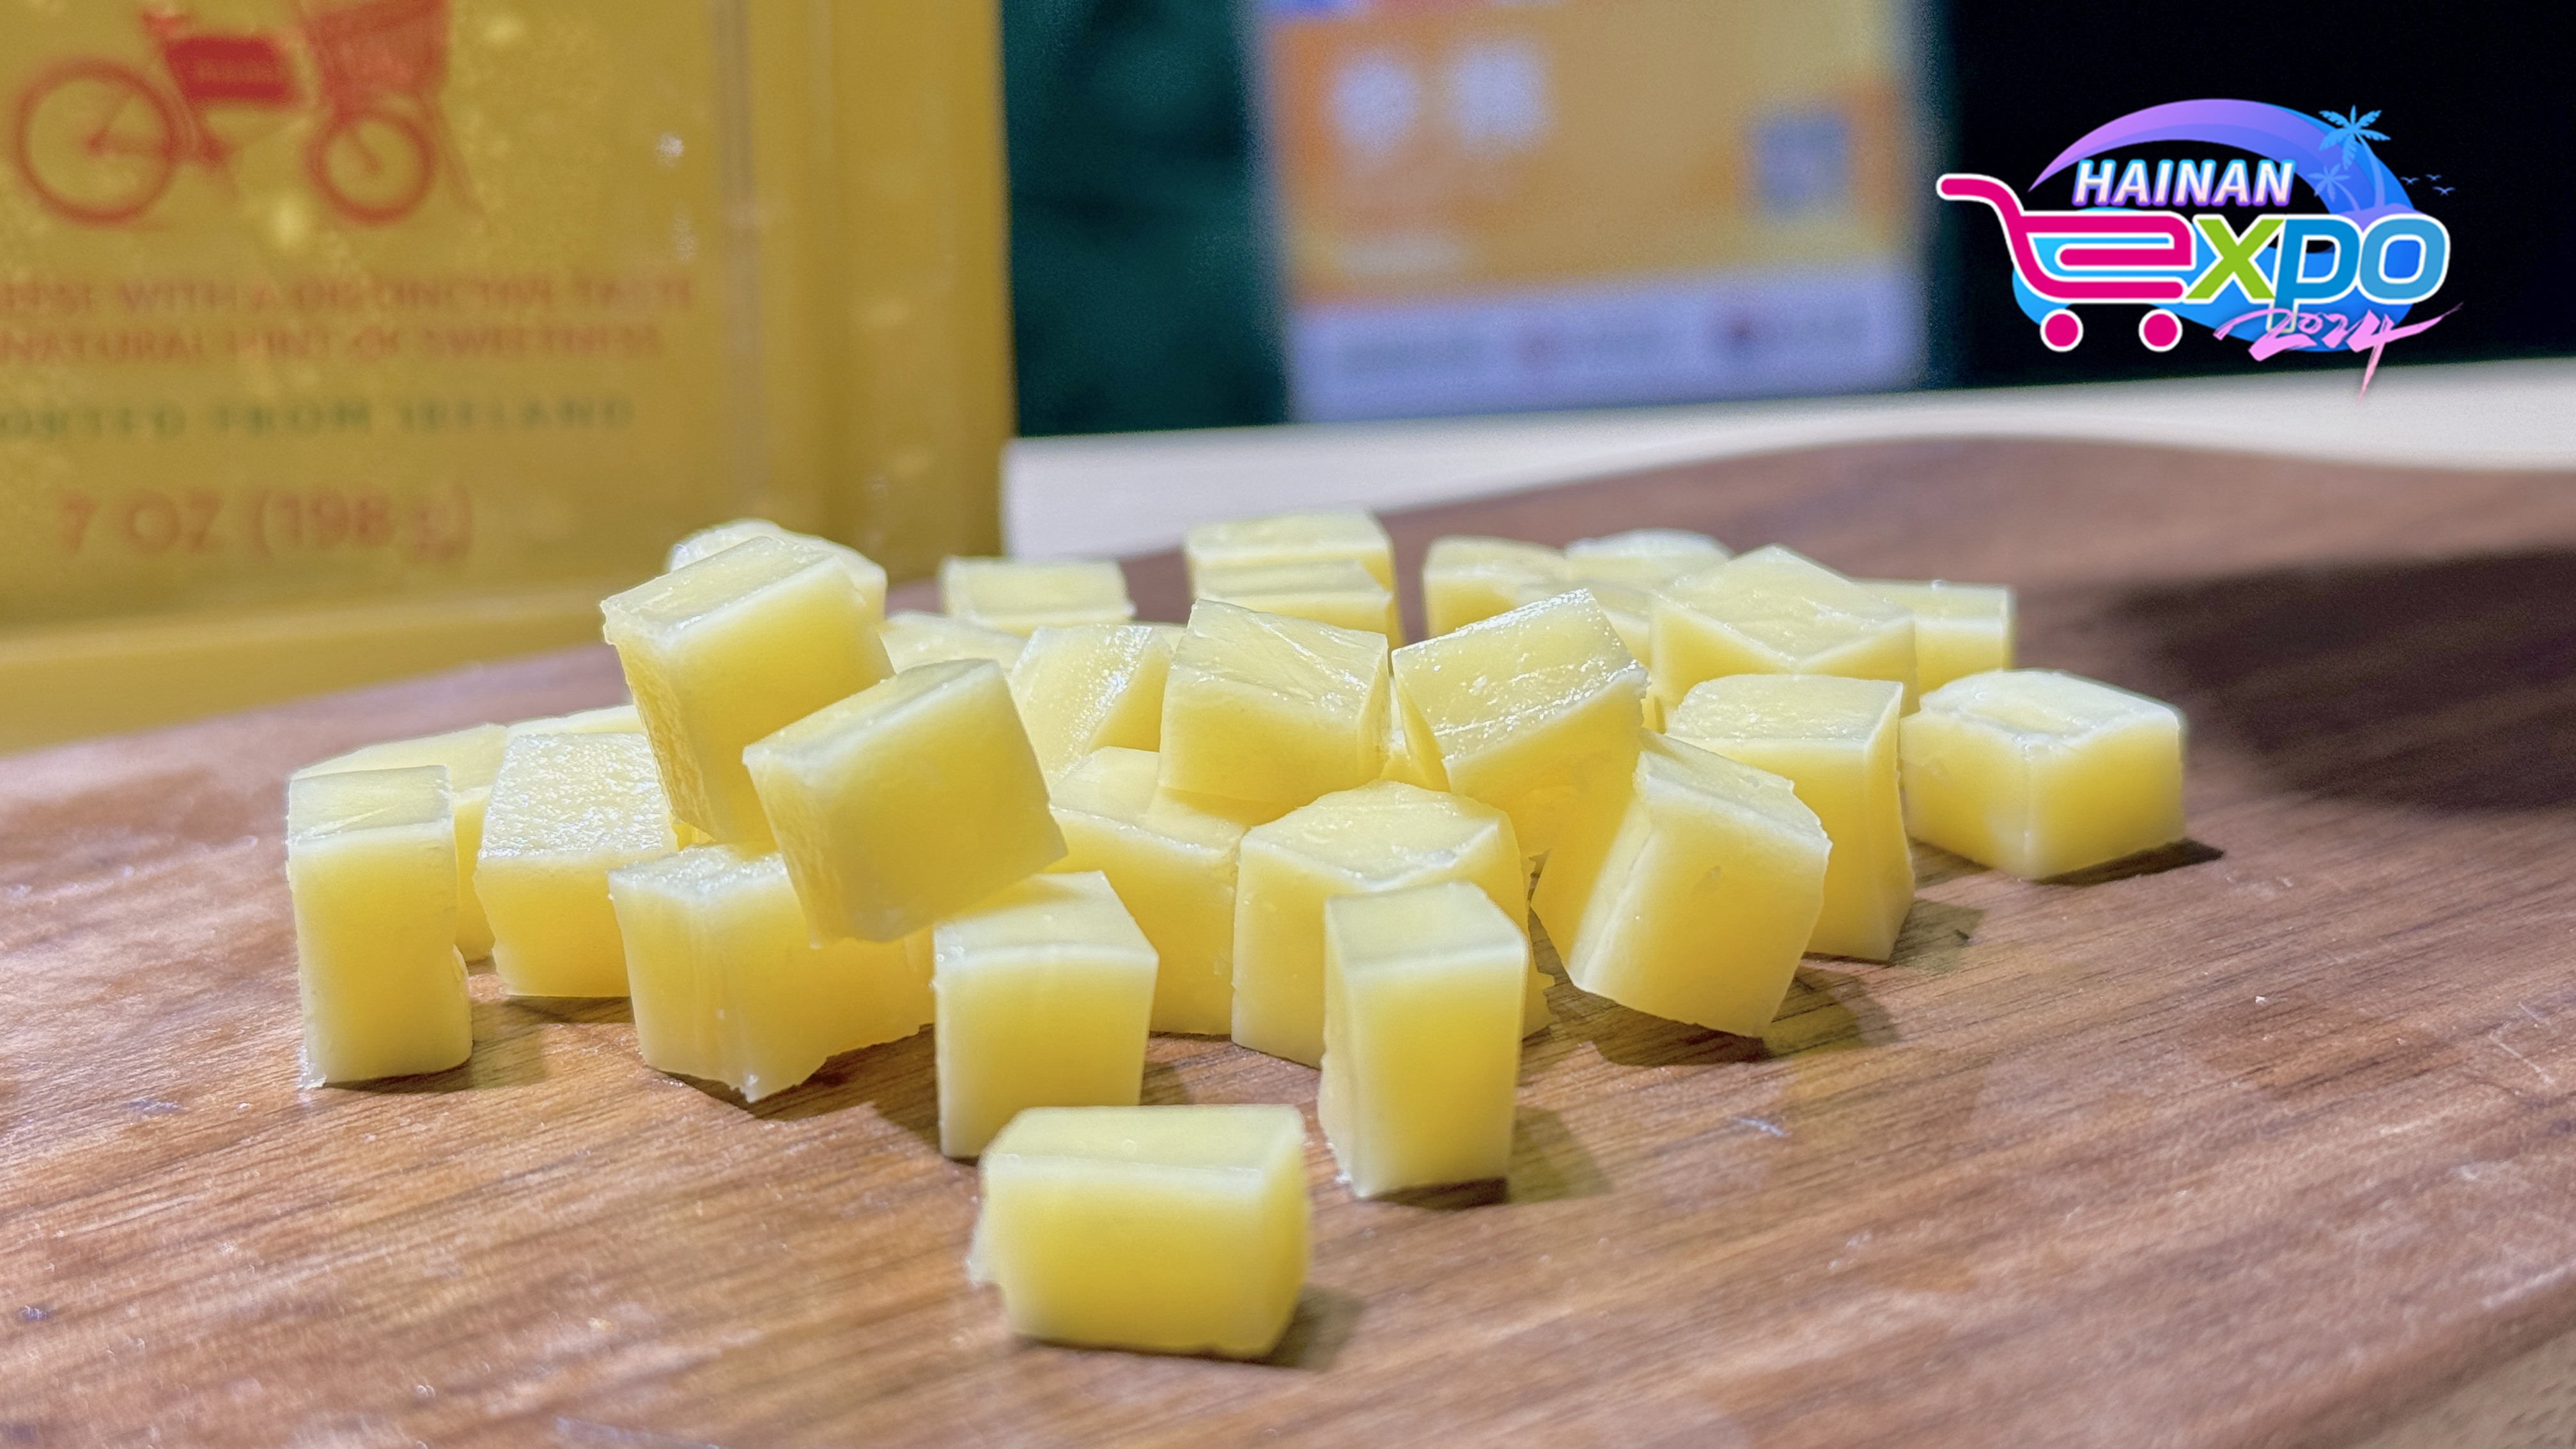 Expo in pics: Tasting global snacks at the Hainan Expo